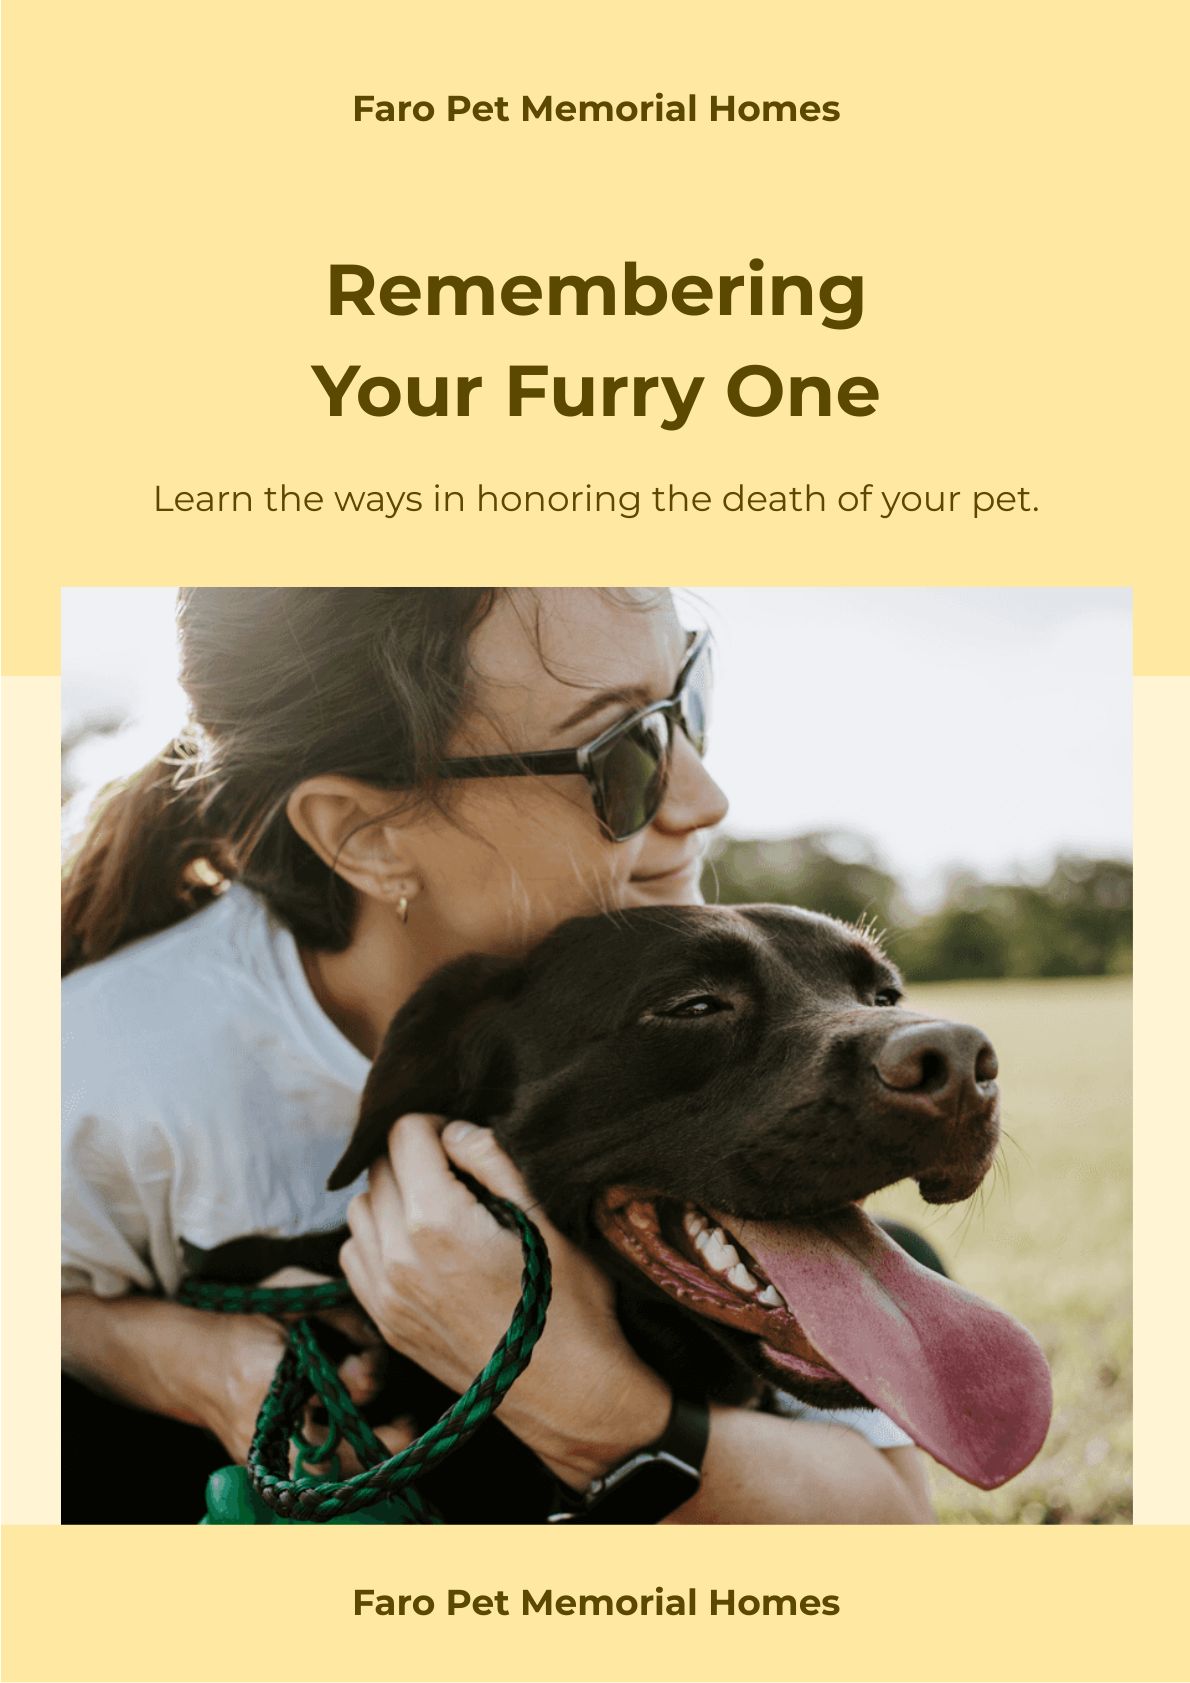 Free Pet Memorial Photo Magnet Template in Word, Illustrator, PSD, Apple Pages, Publisher